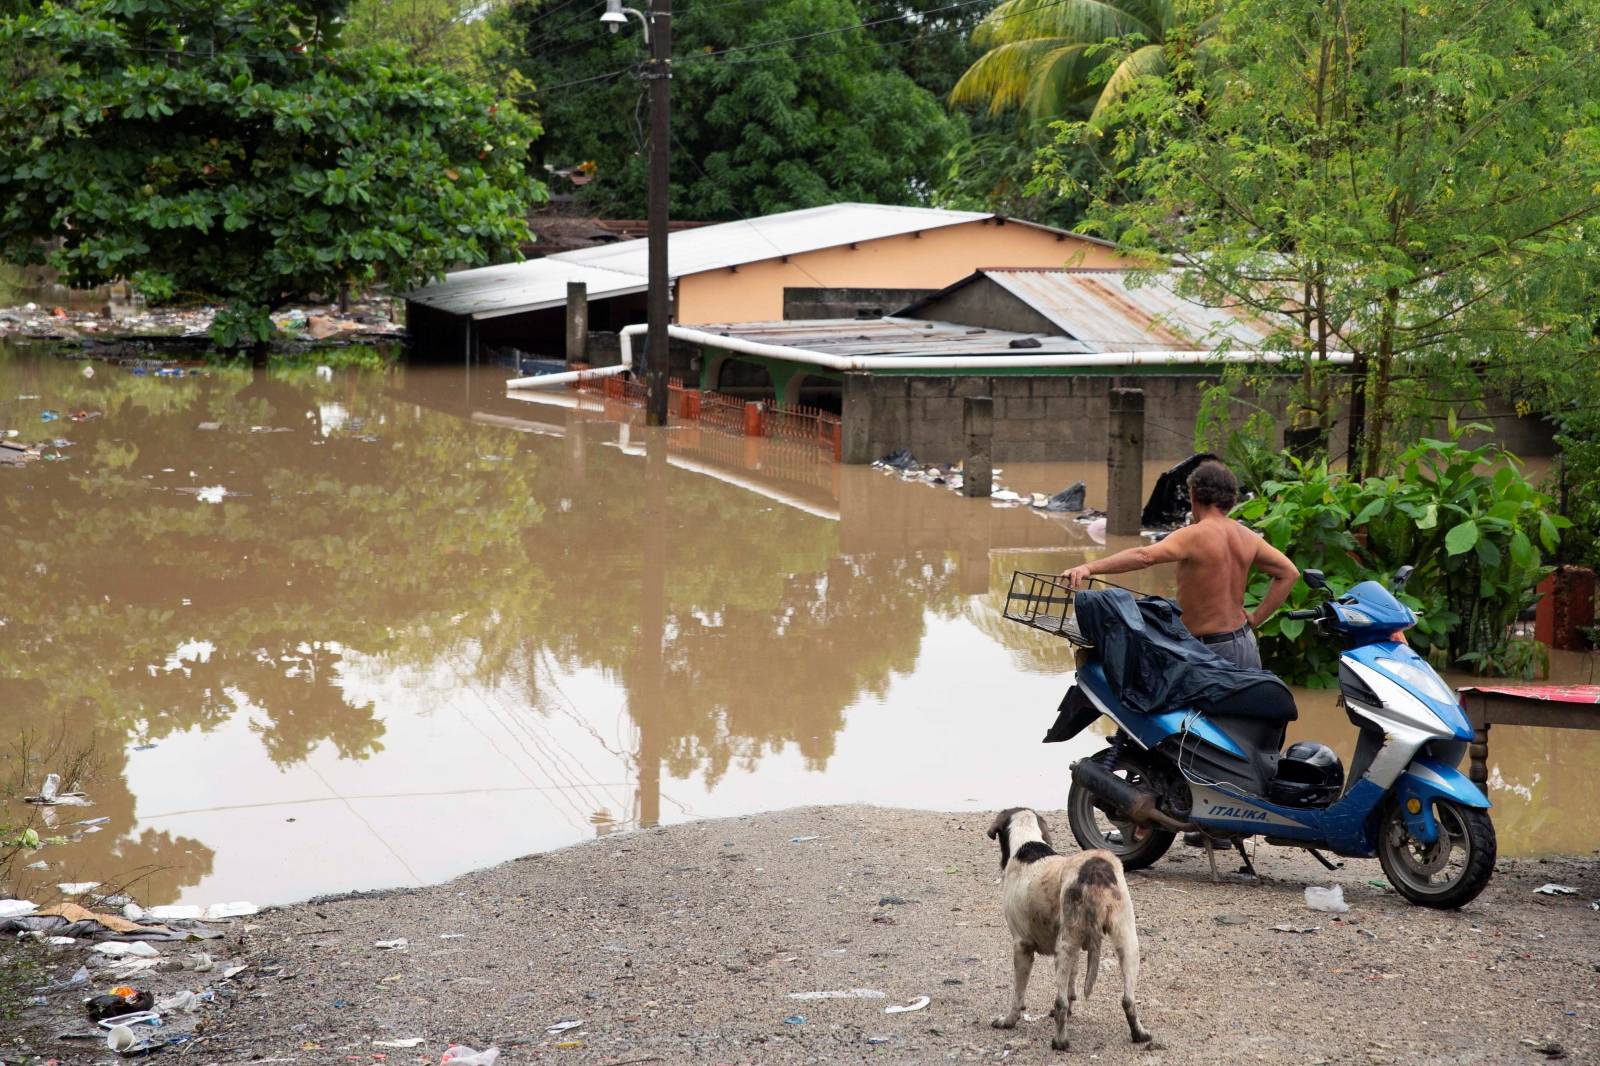 Man looks at houses at an area flooded by the Chamelecon river after the passing of Storm Iota, in La Lima